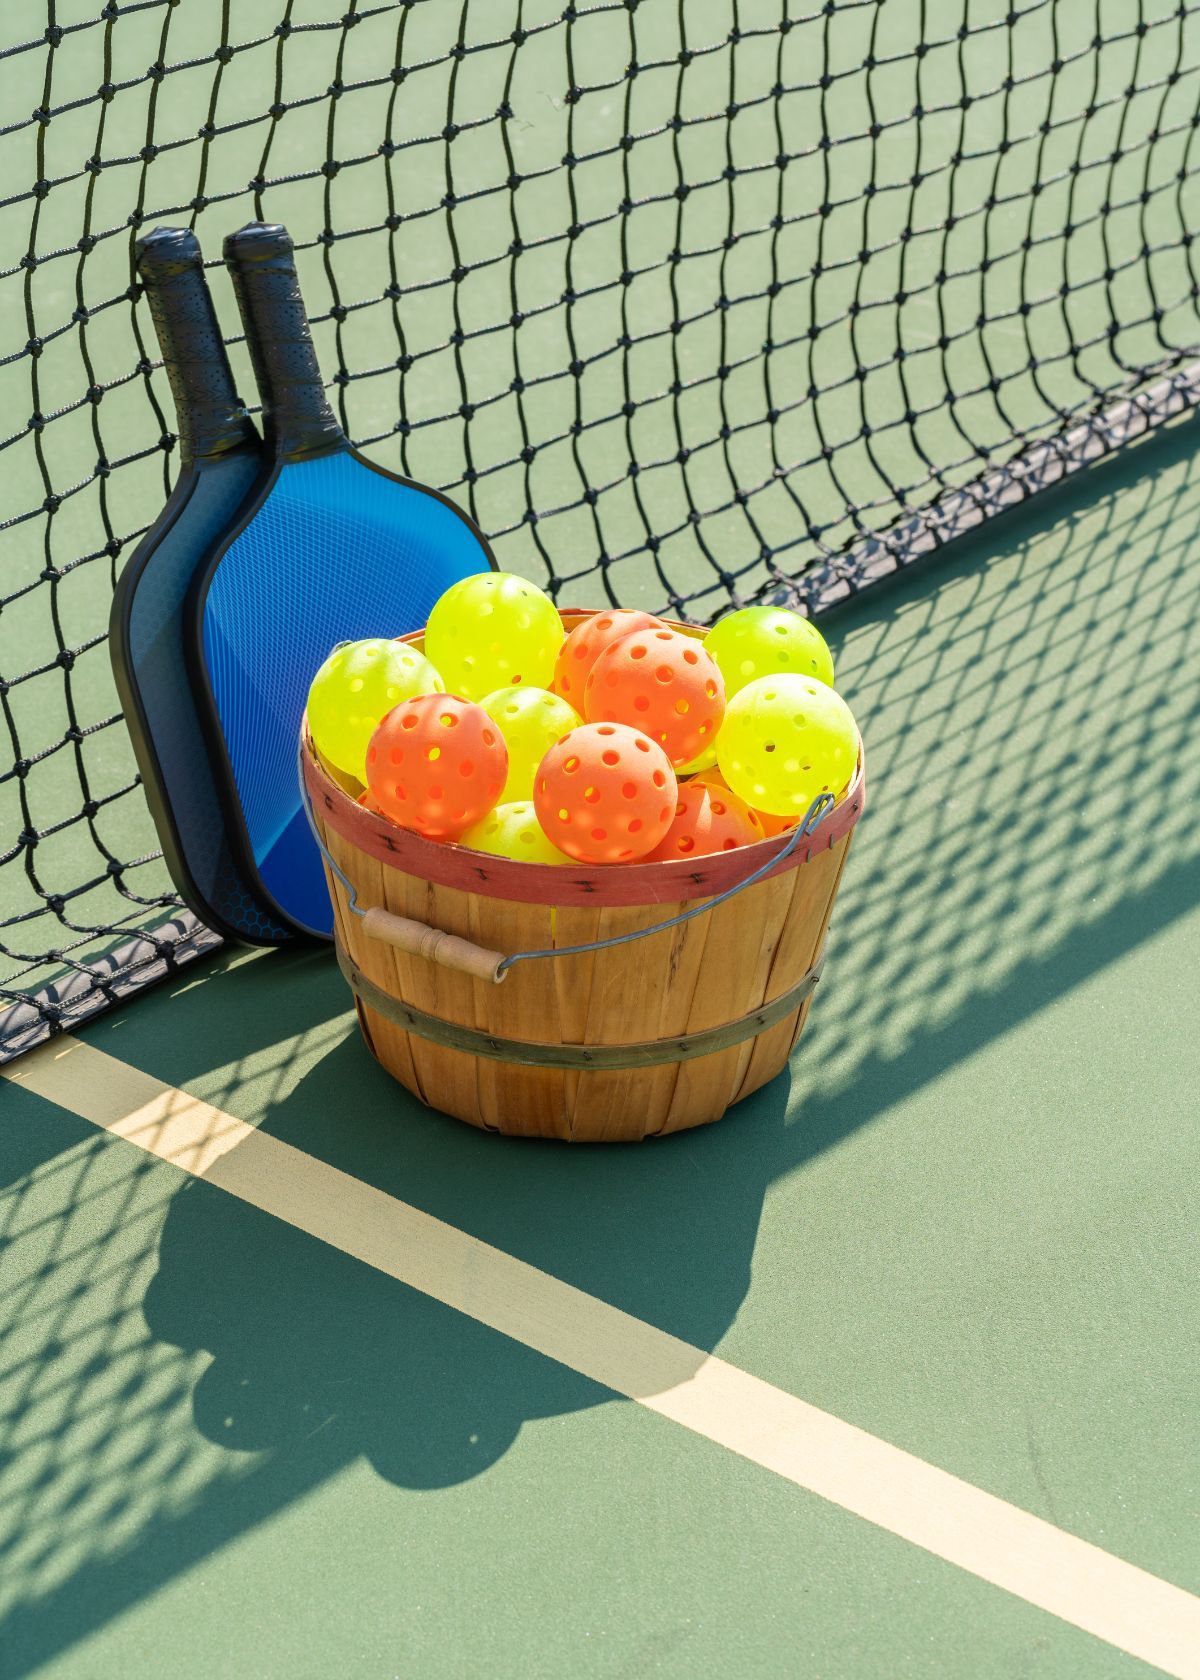 How Wide is a Pickleball Net